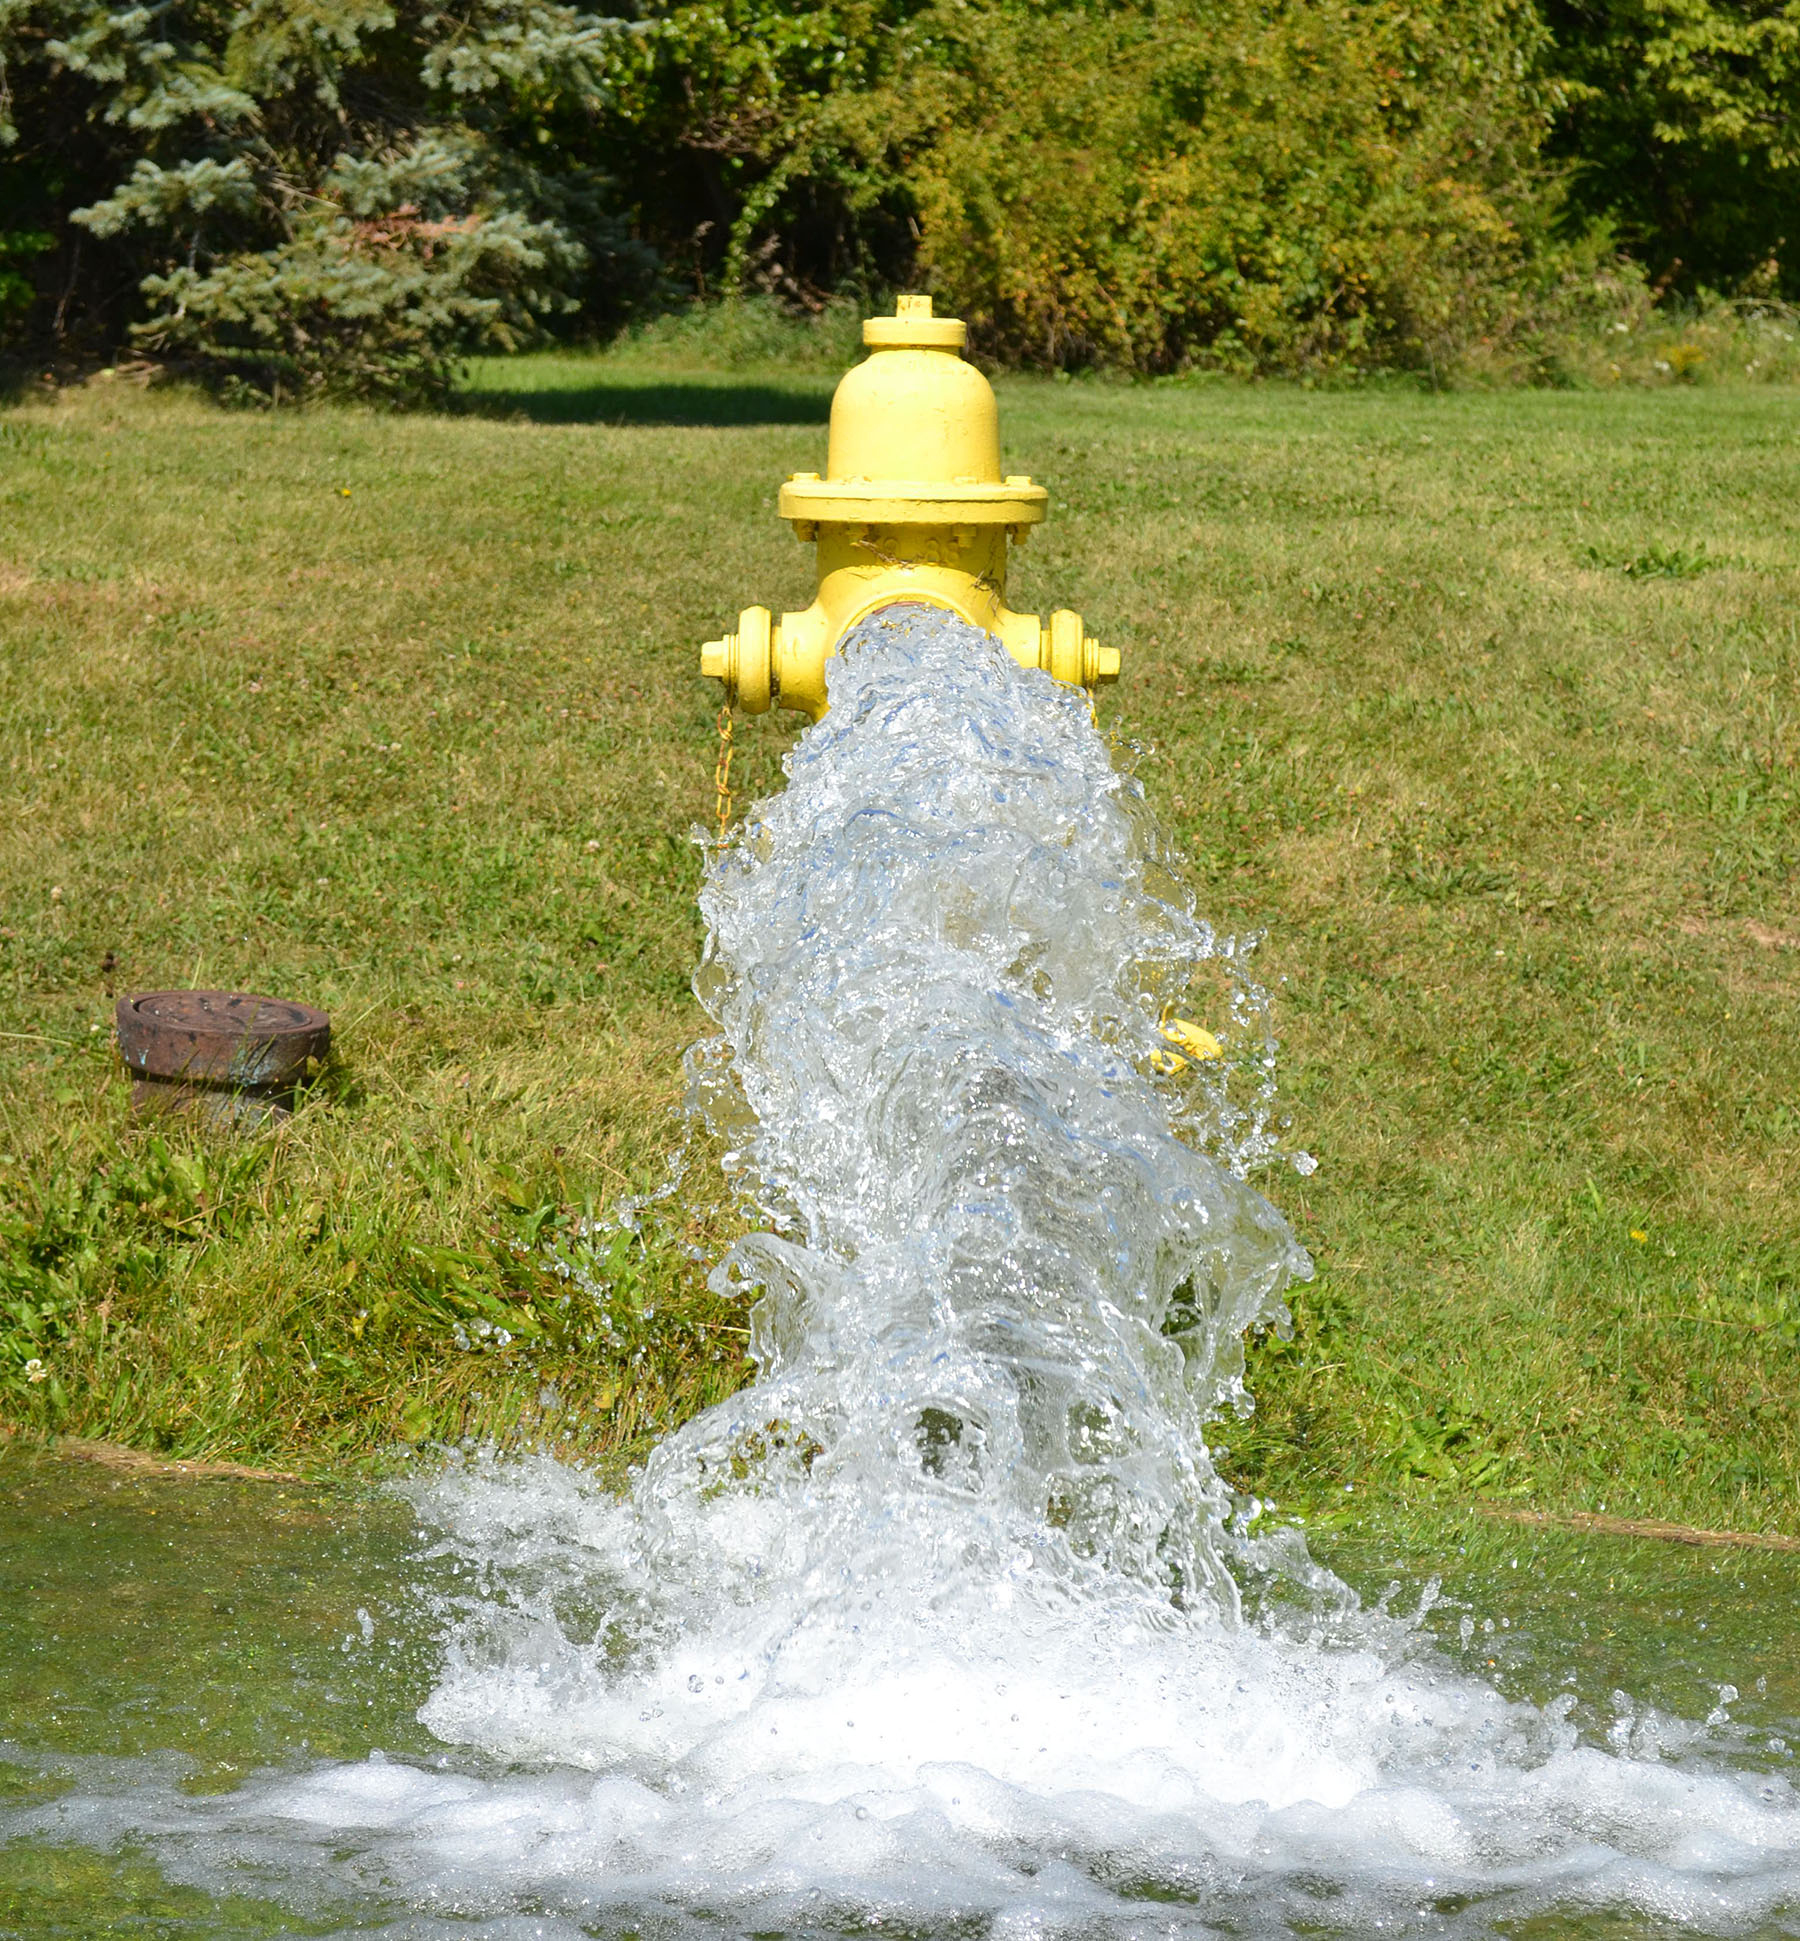 Fort Wayne, drinking water, water quality, safe water, fire hydrant, public health